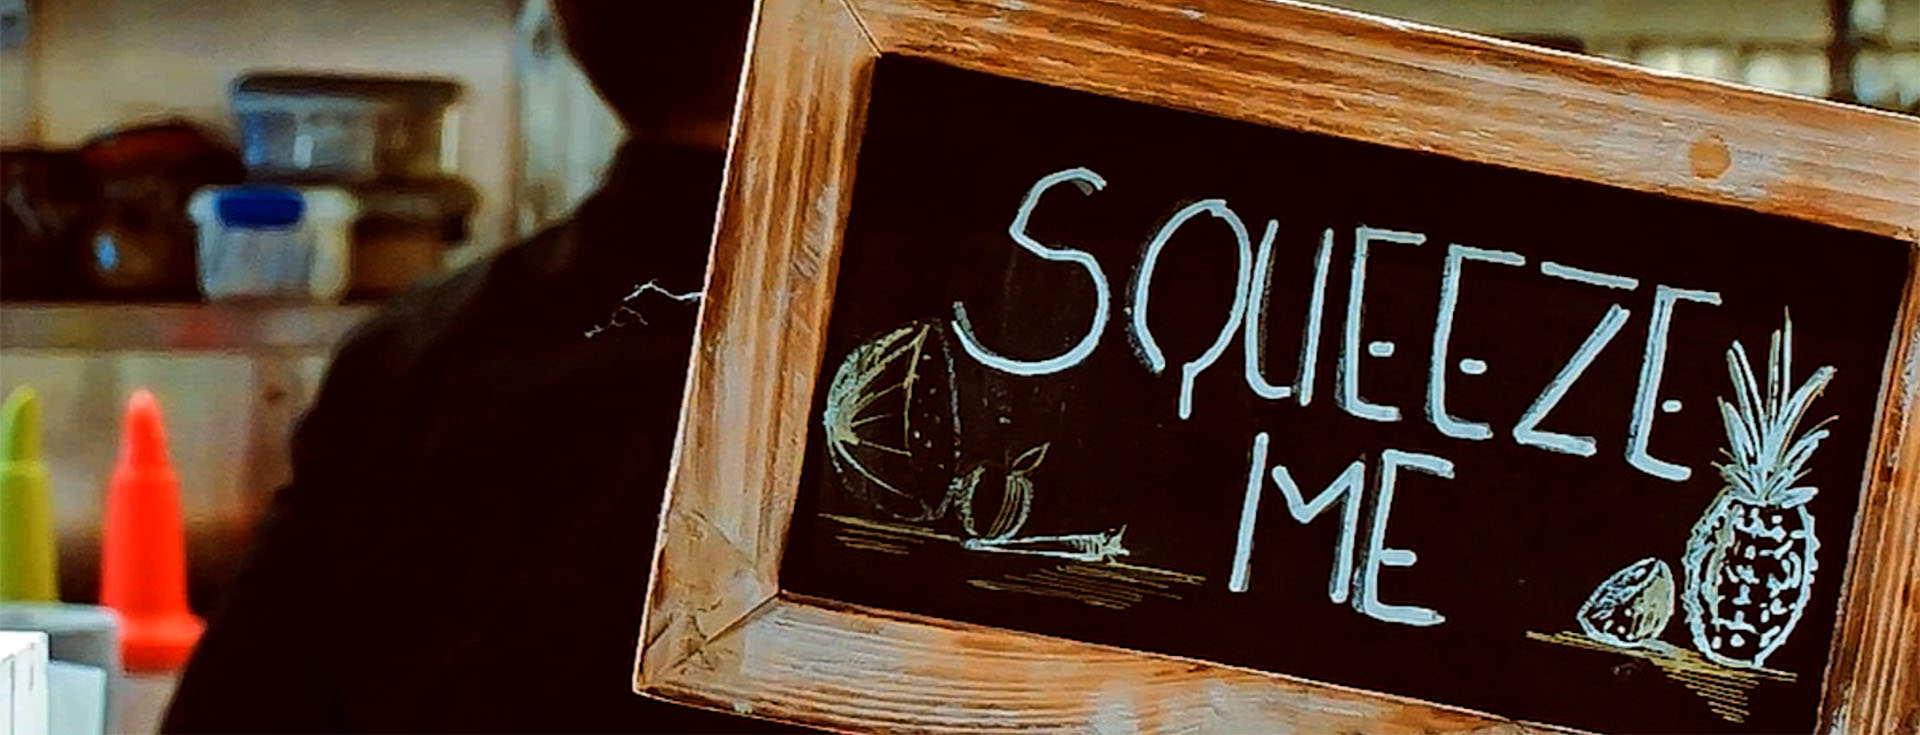 Squeeze me sign on blackboard